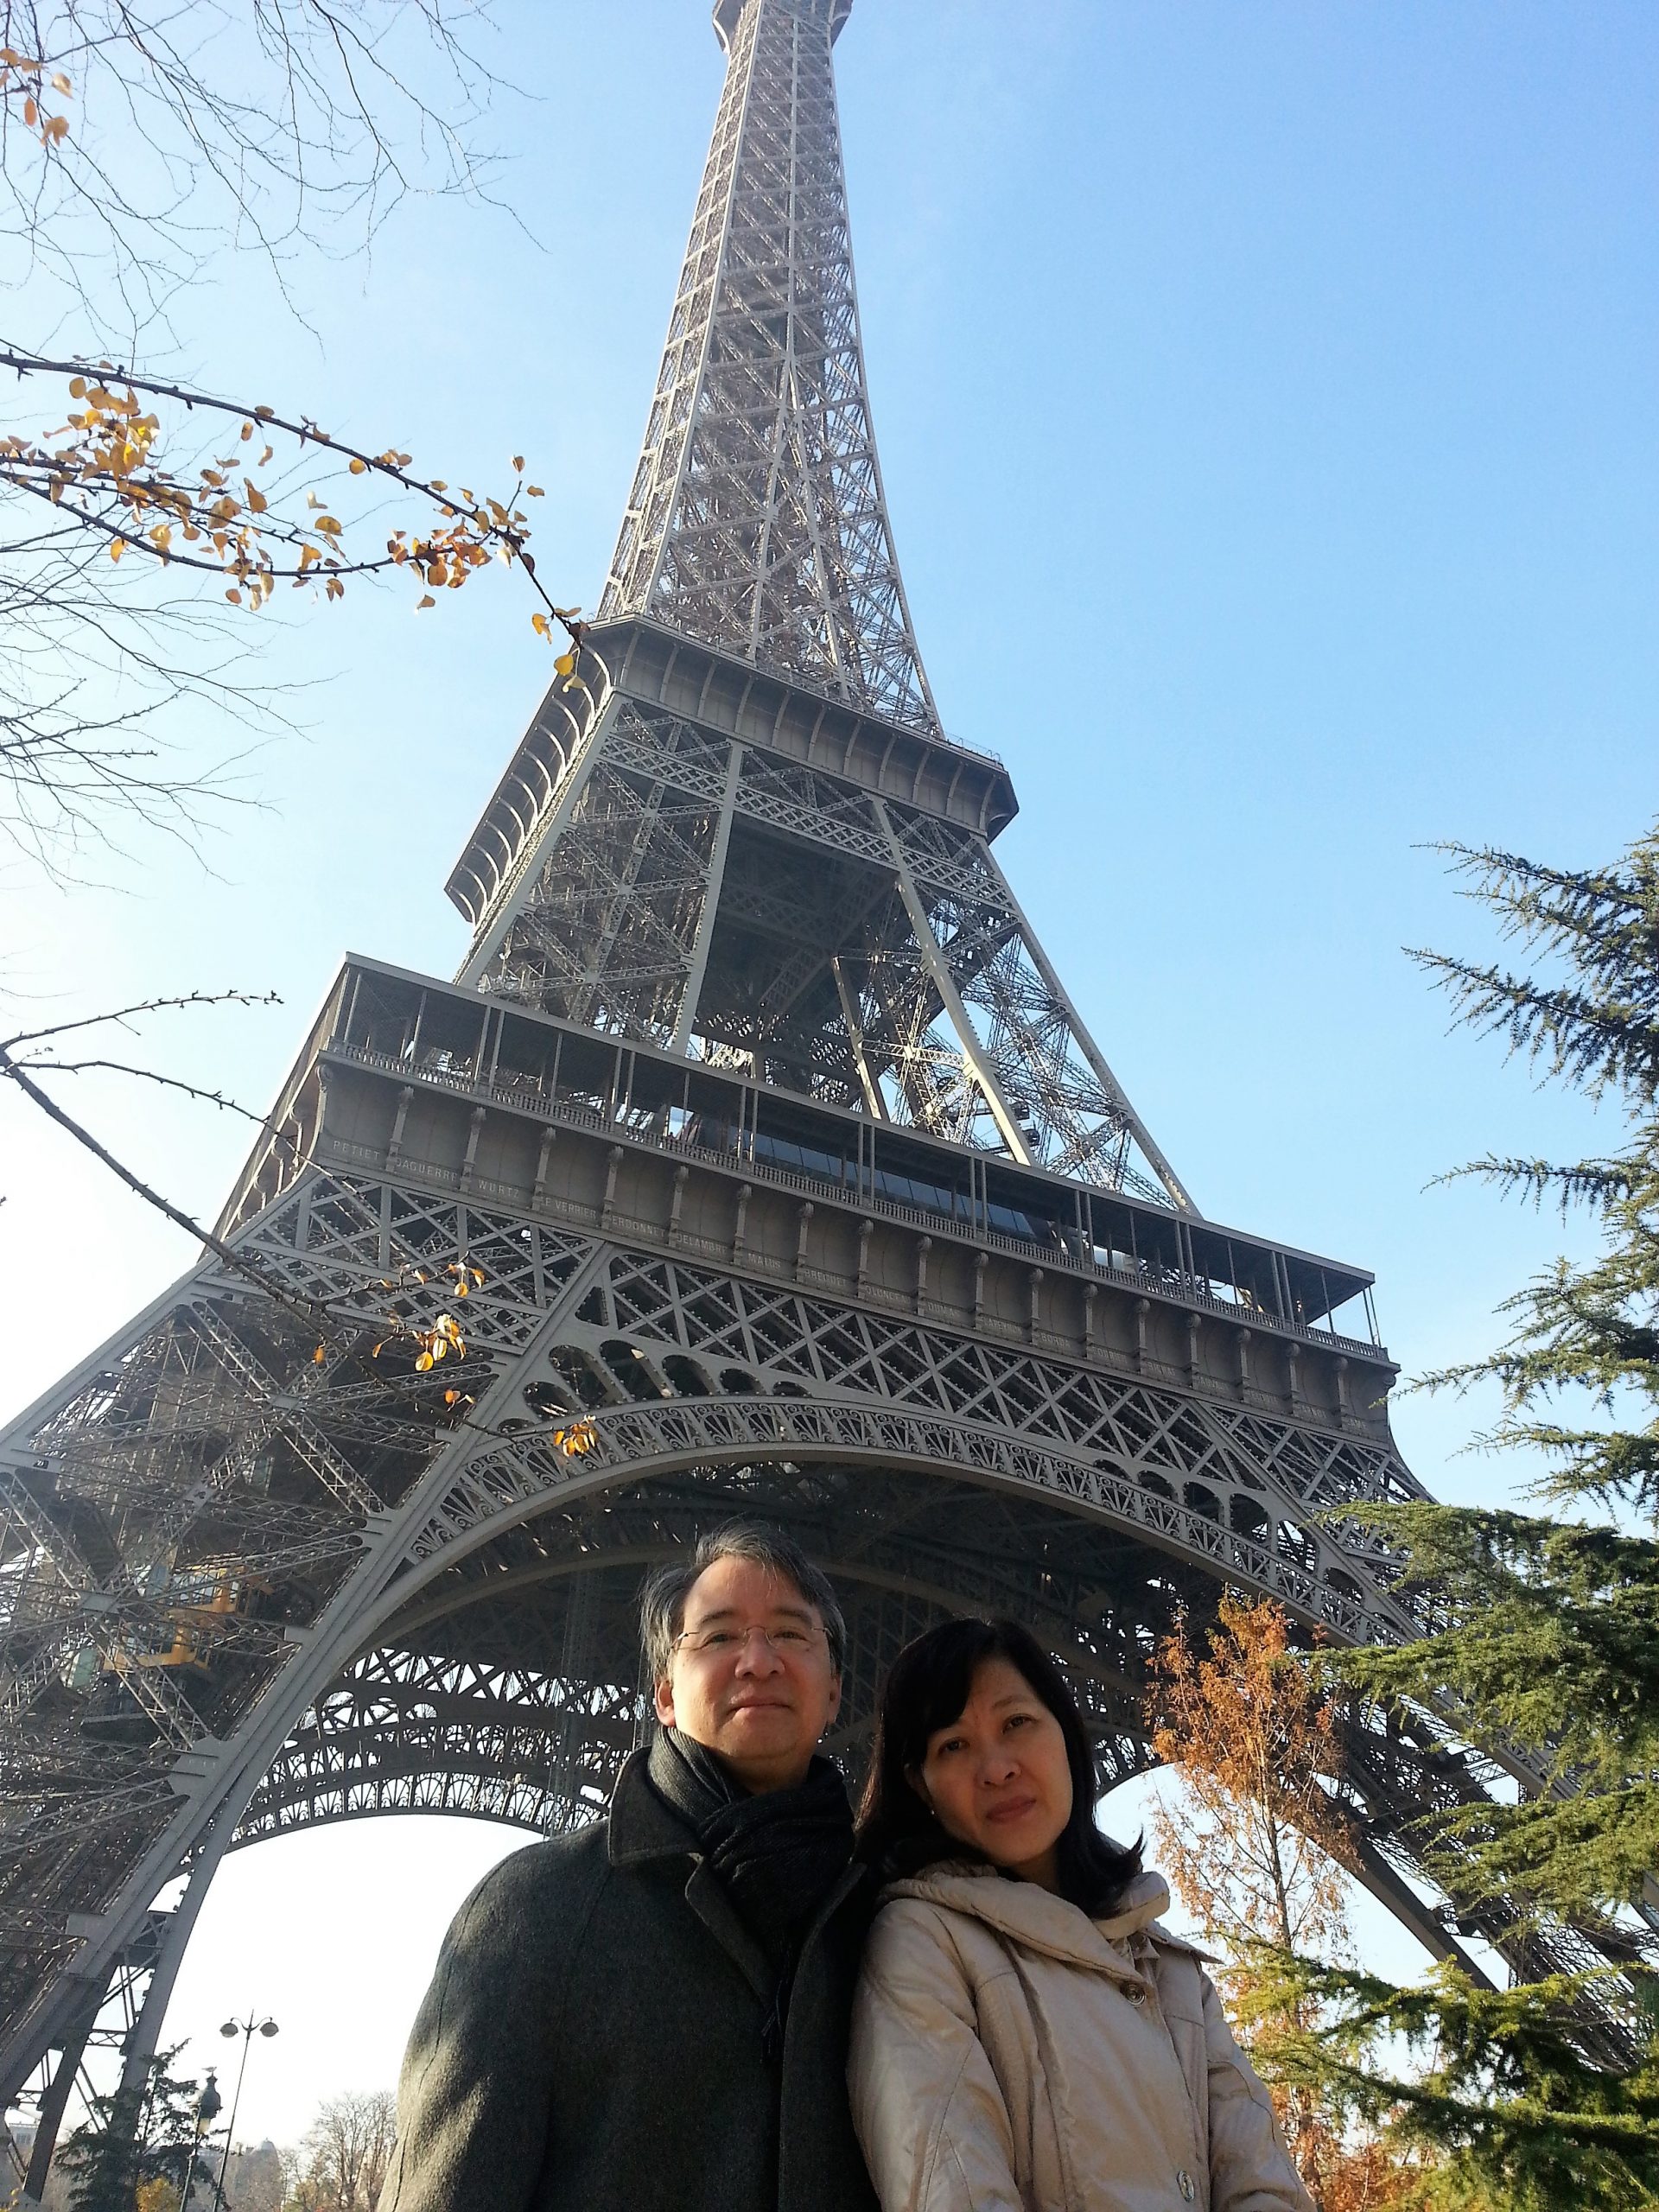 Sih with Angie in Paris in 2013. That year, they brought the whole family to various parts of France on a pilgrimage that strengthened their faith and bonded the family.